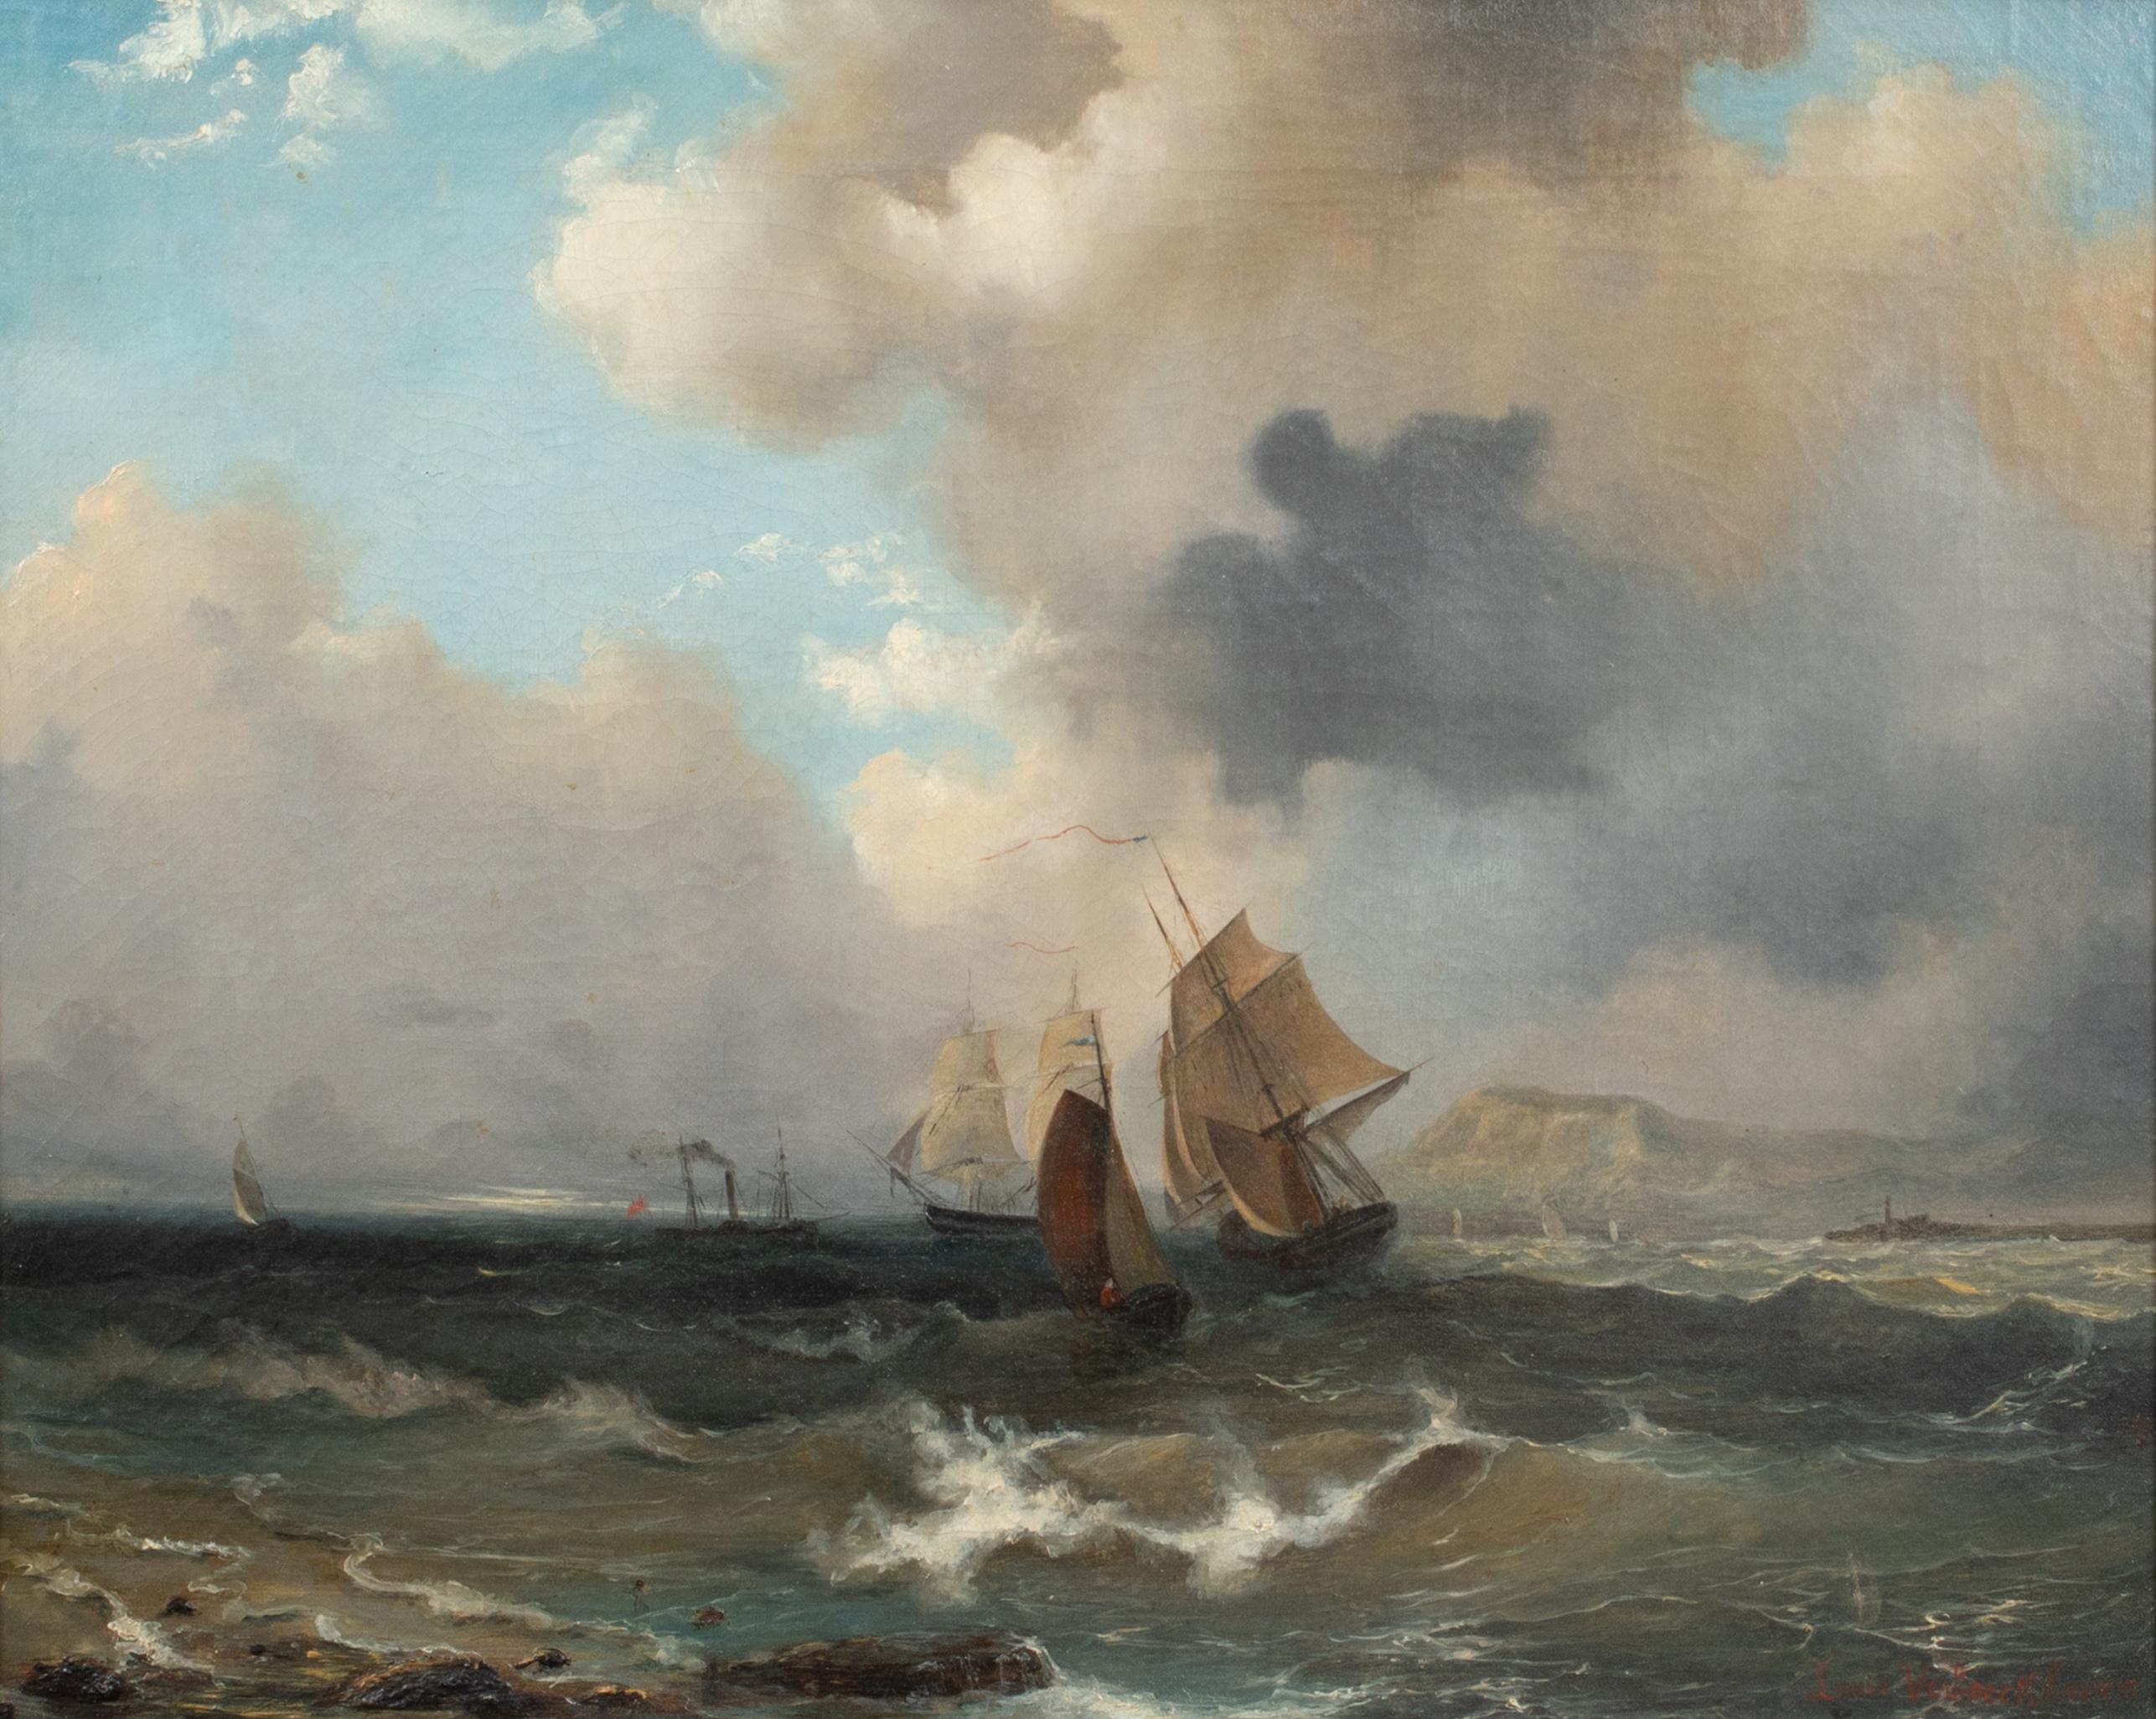 Dutch Ships Sailing Off The Coast, 19th Century  - Painting by Charles Louis Verboeckhoven